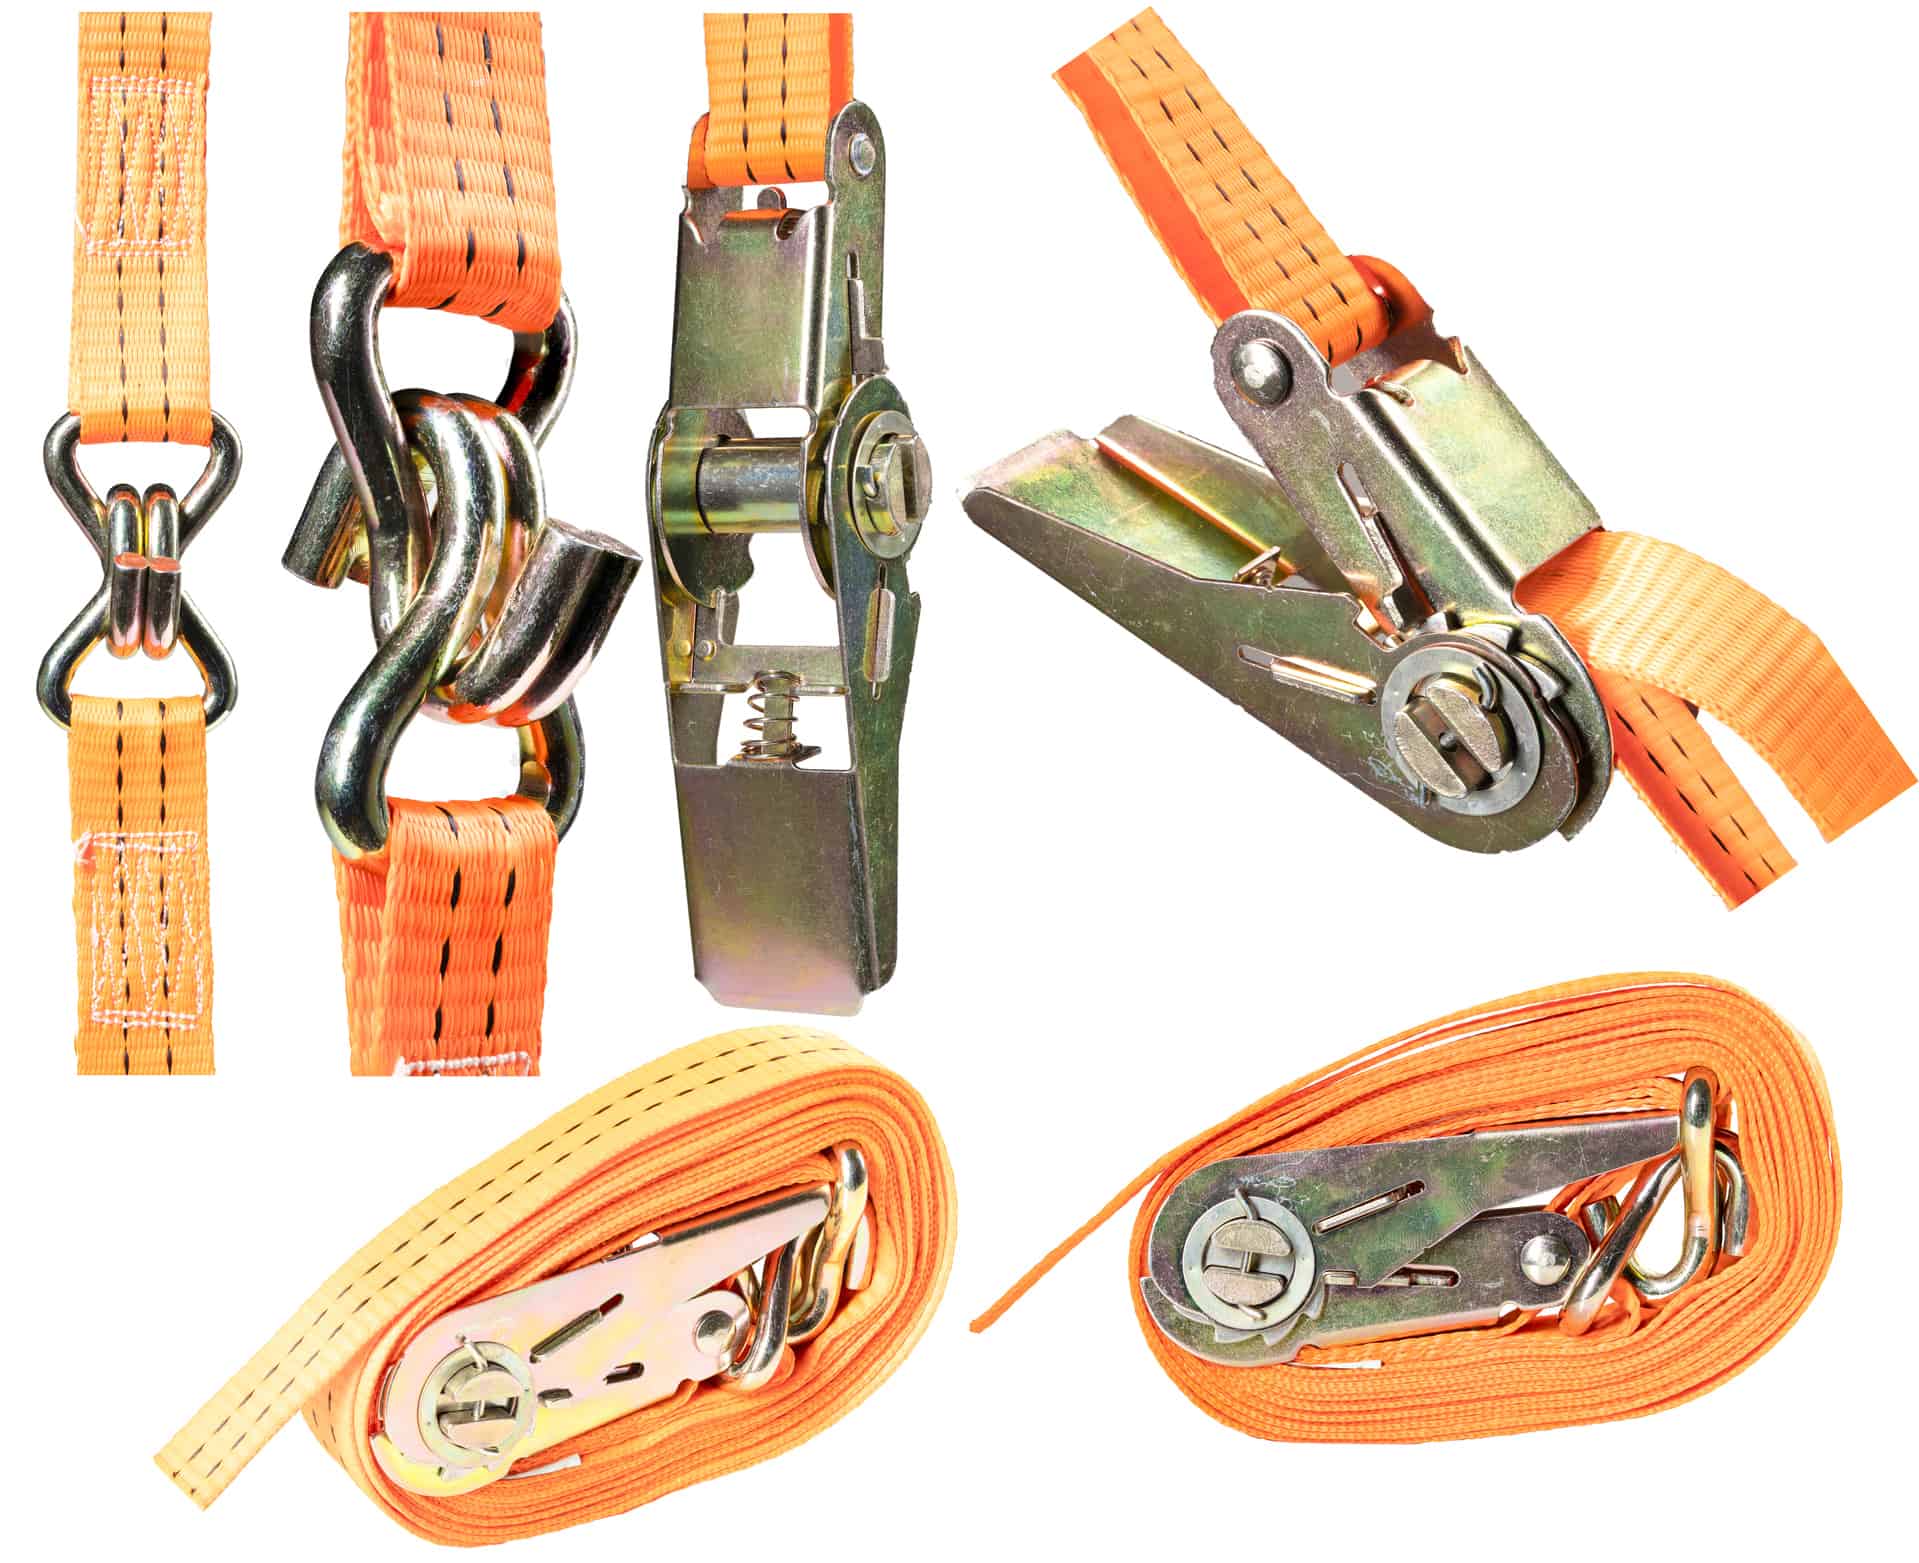 Cargo strapping belt for trucks. Accessories for securing cargo and goods. Isolated background.